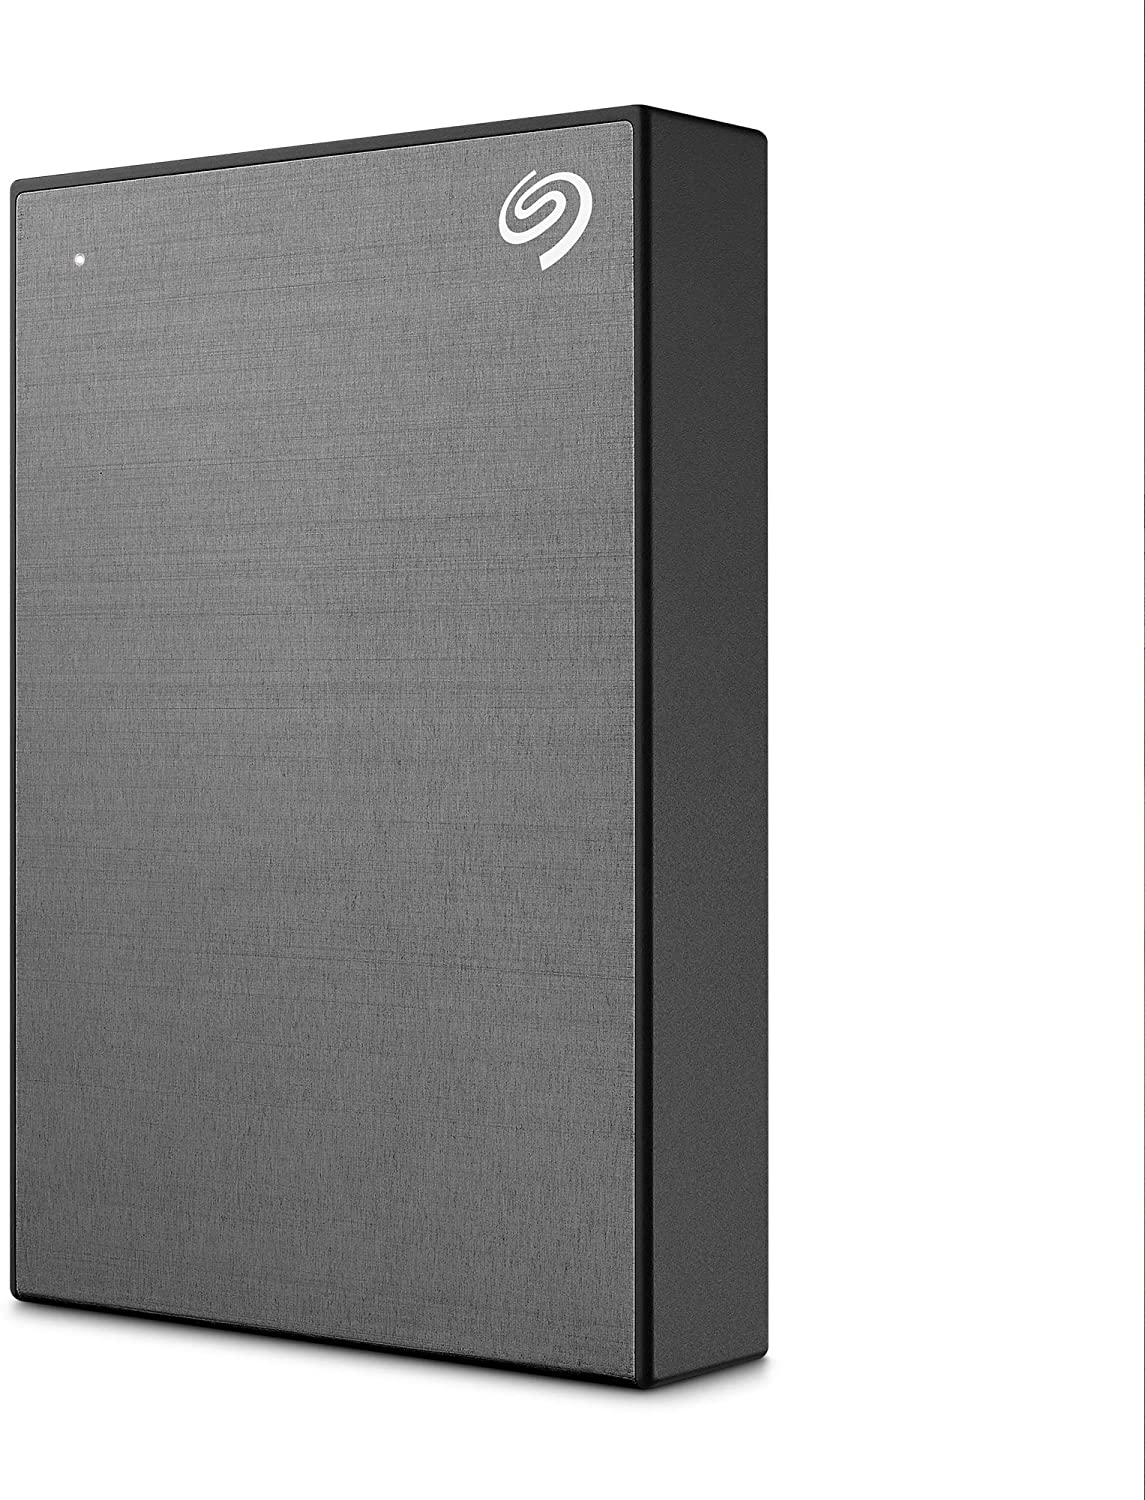 Disco Externo Seagate One Touch 4TB 2.5"